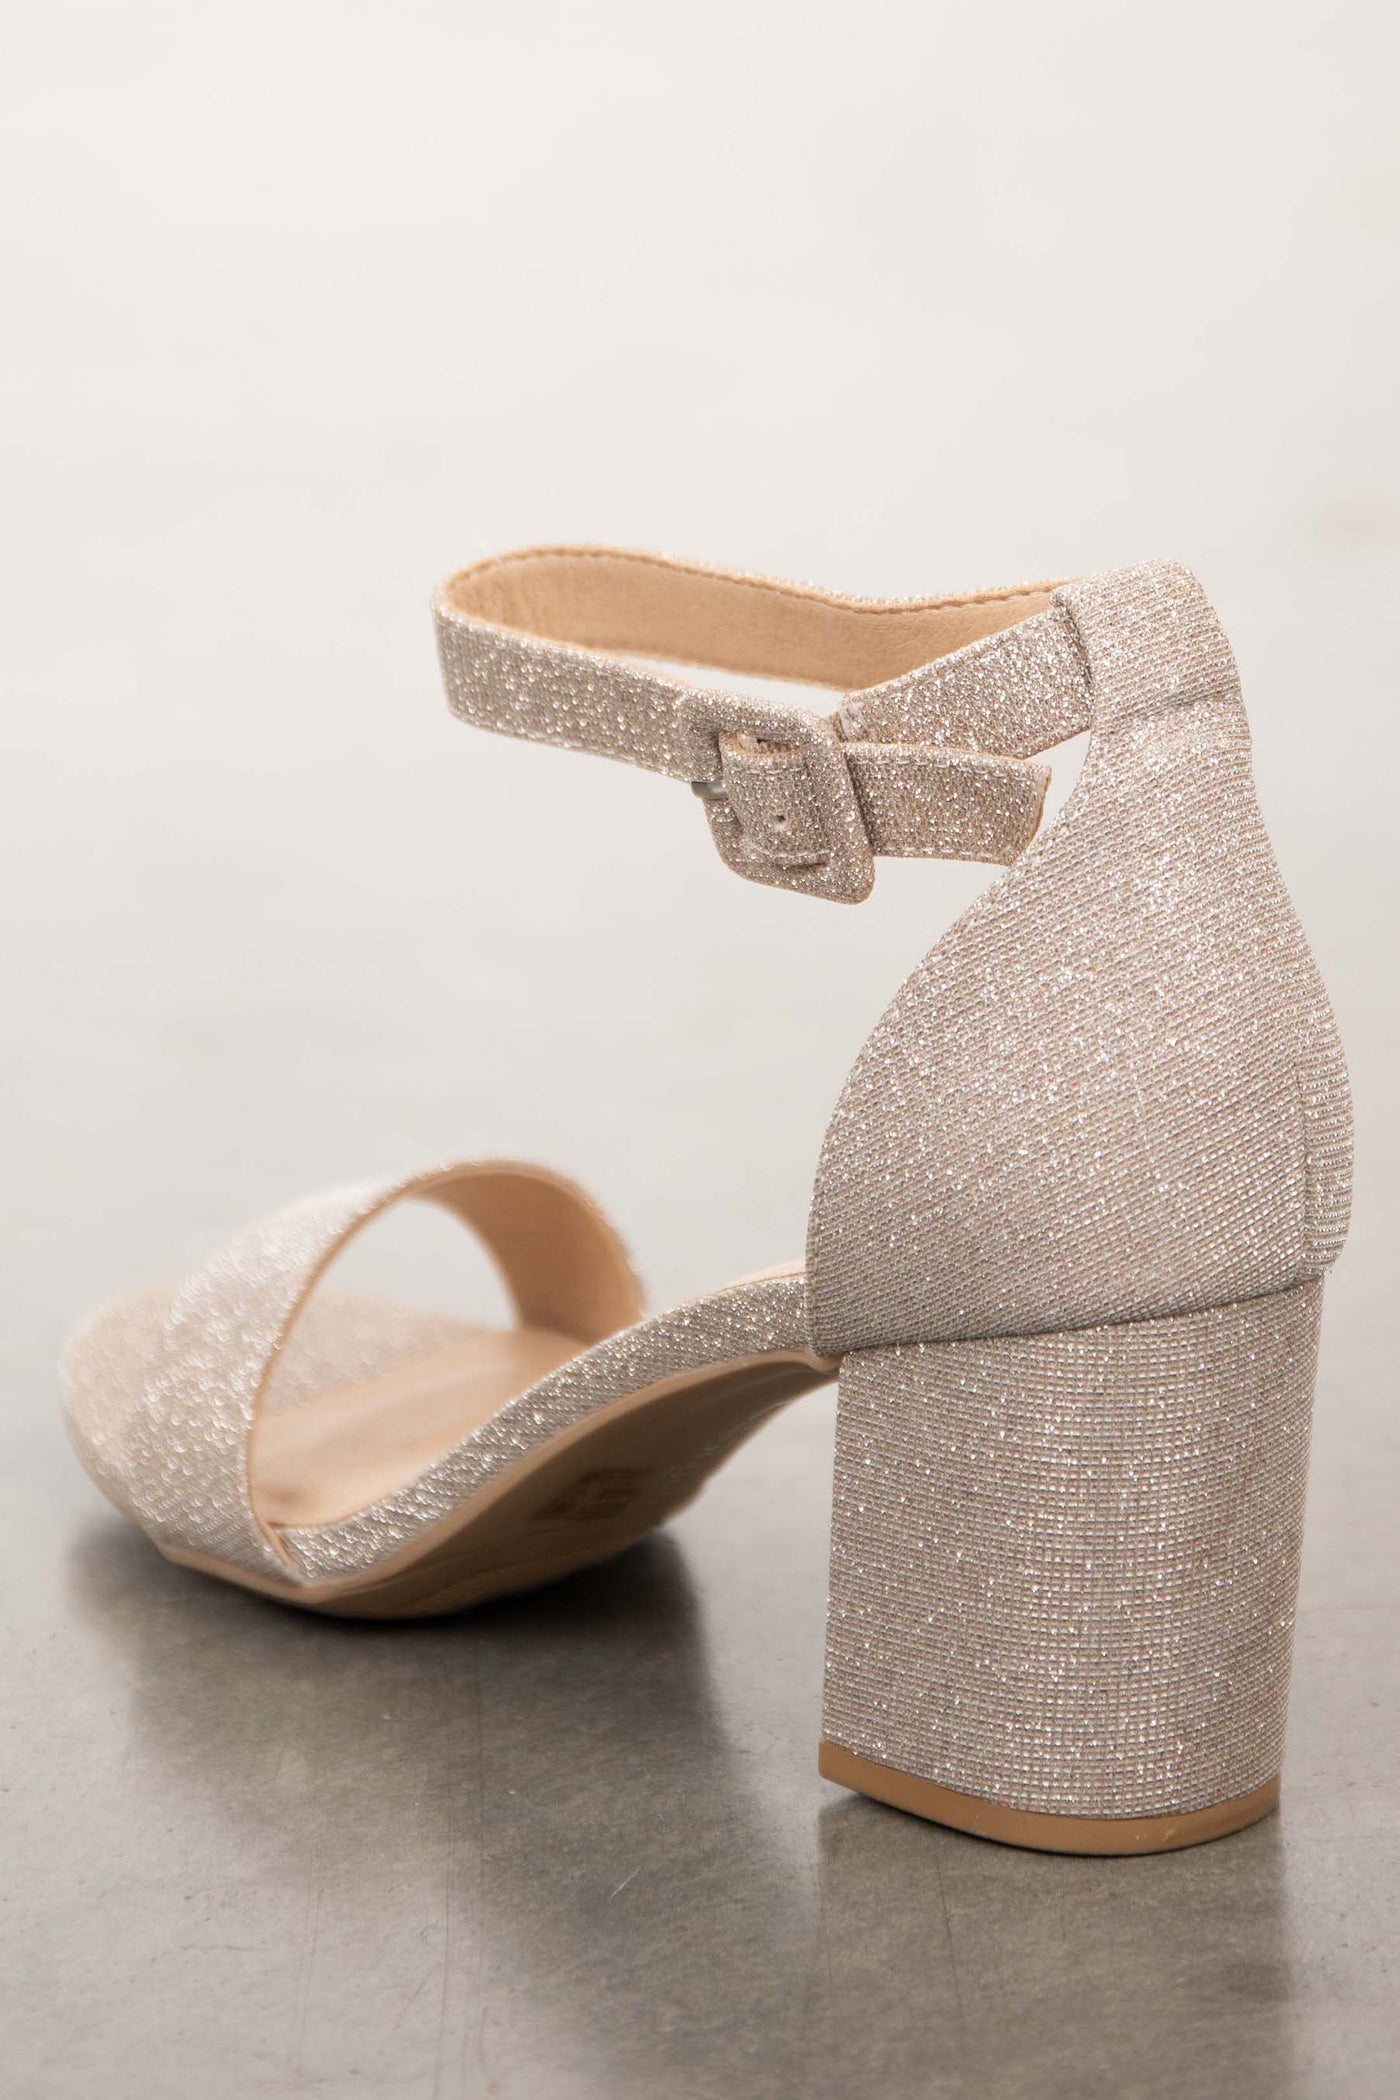 Silver Glittery Block Heels with Ankle Buckle